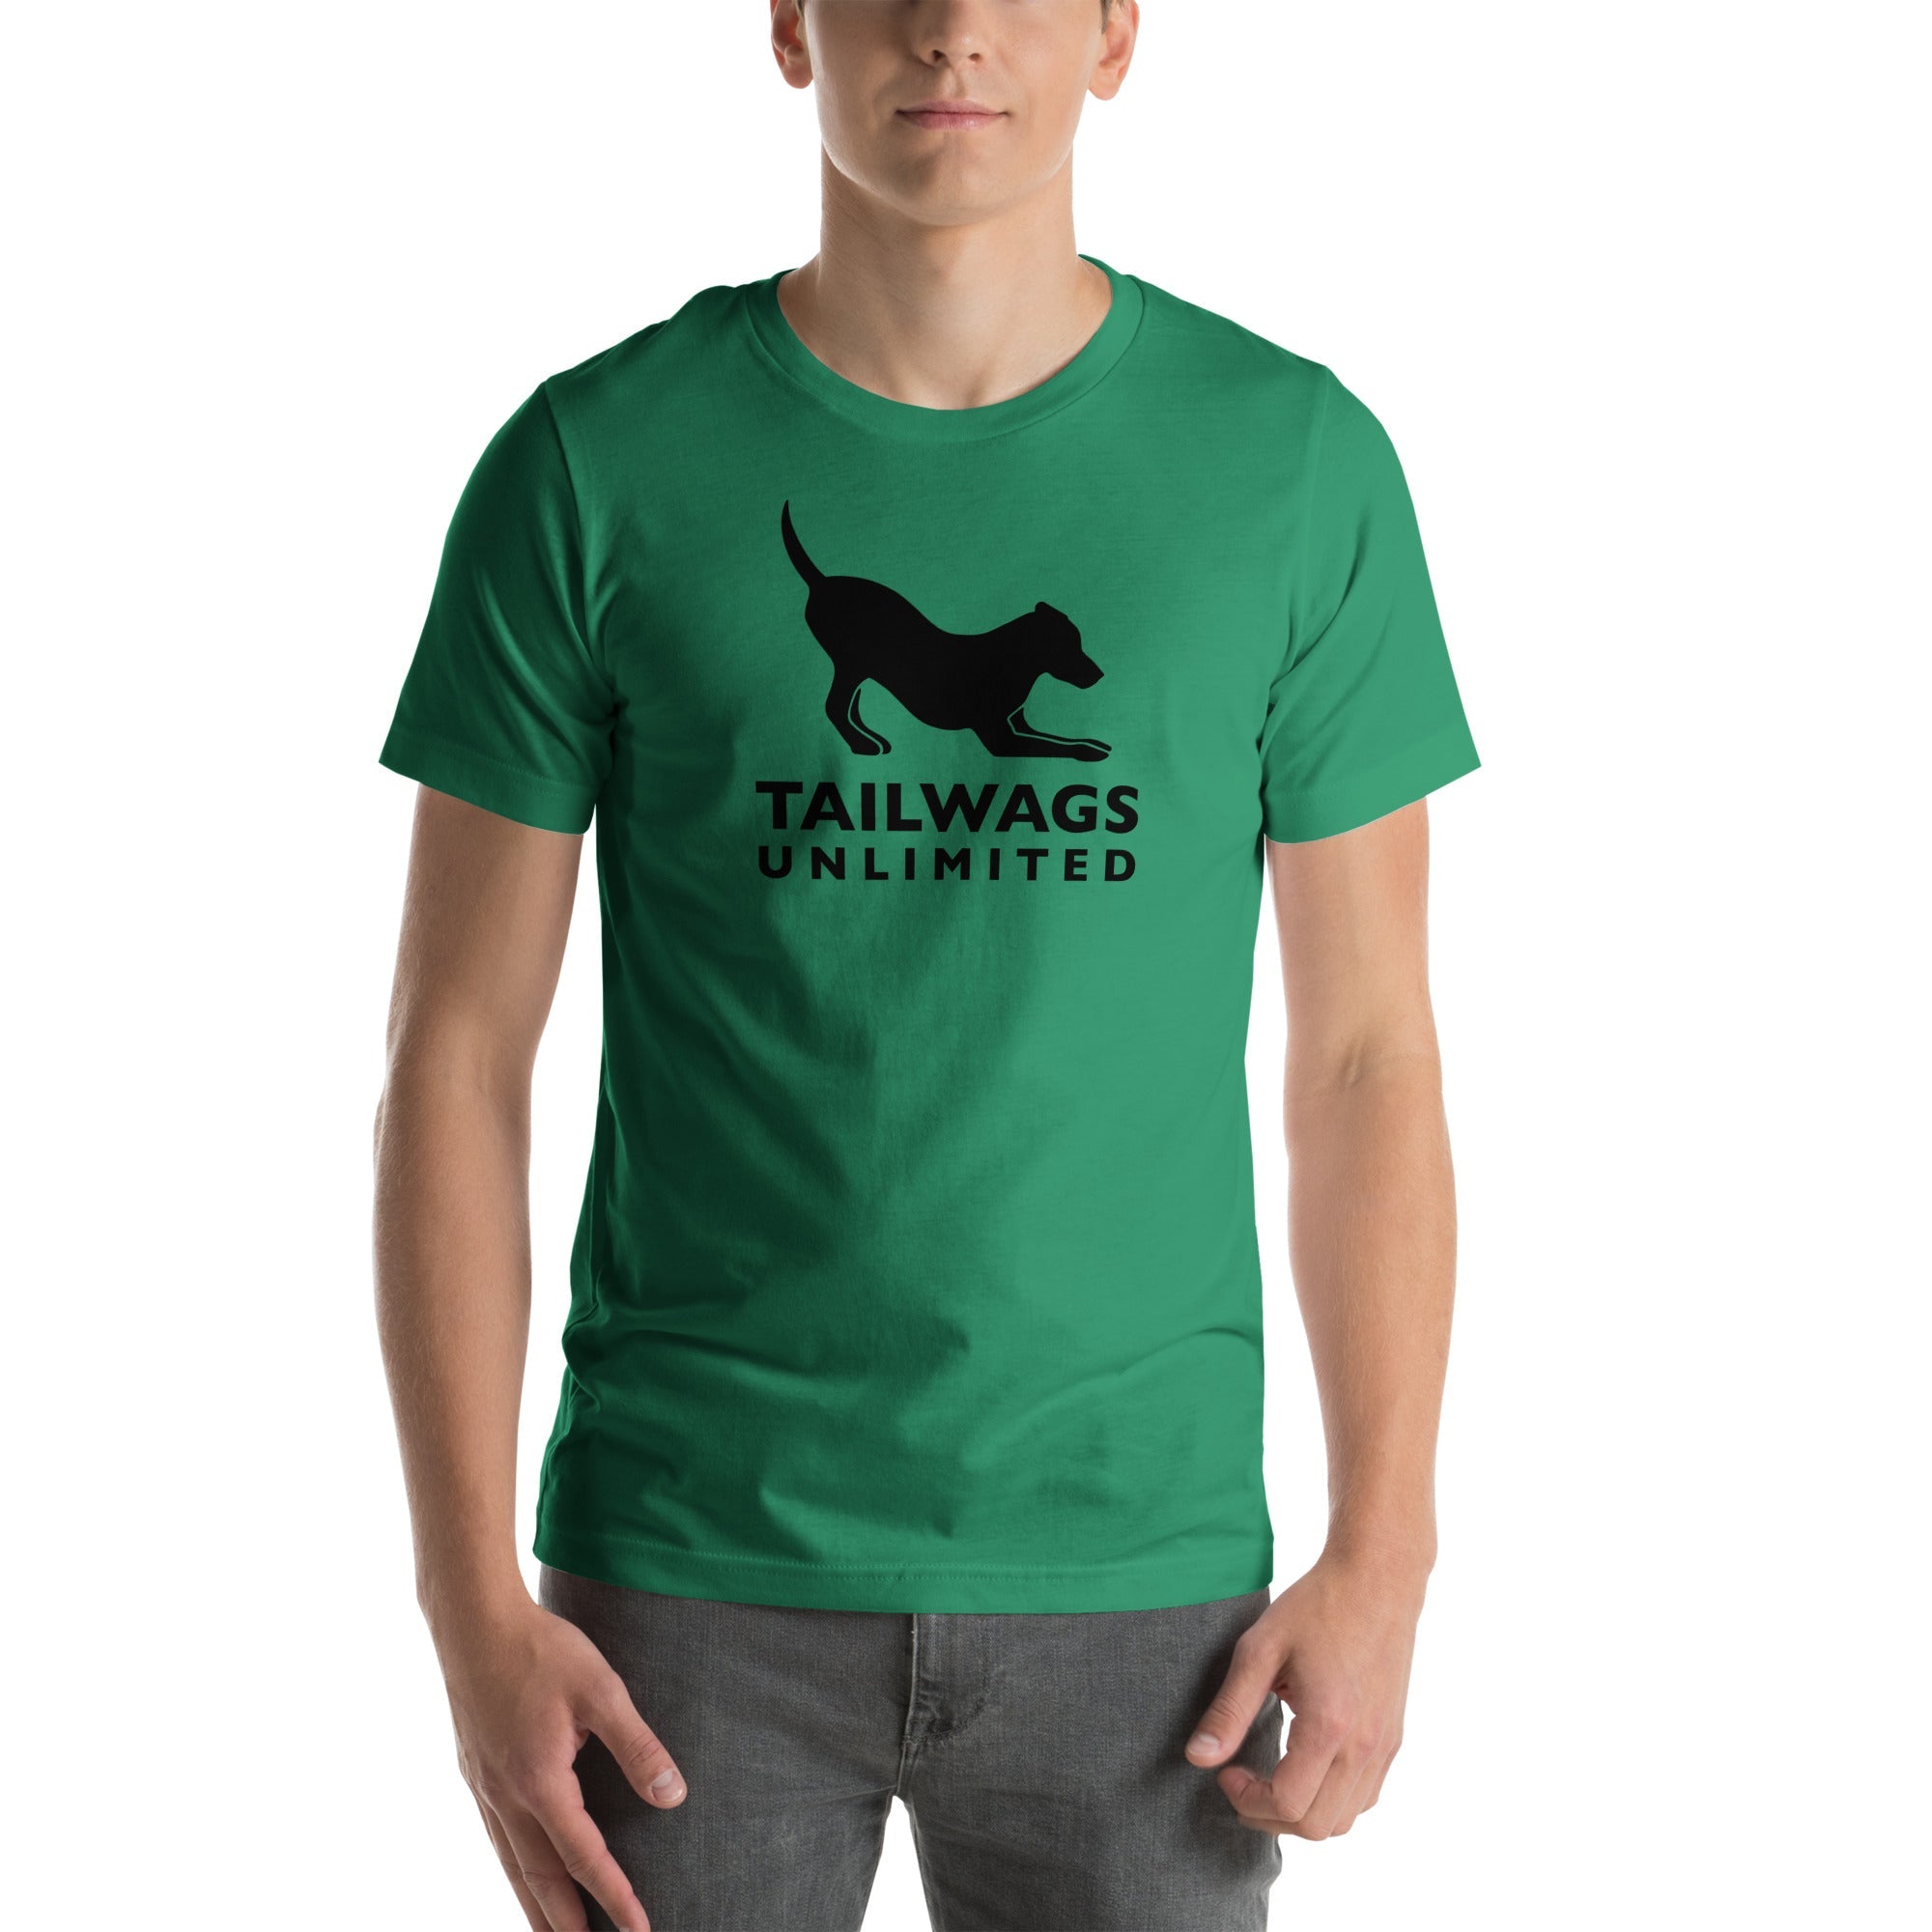 Black Logo T-Shirt - TAILWAGS UNLIMITED